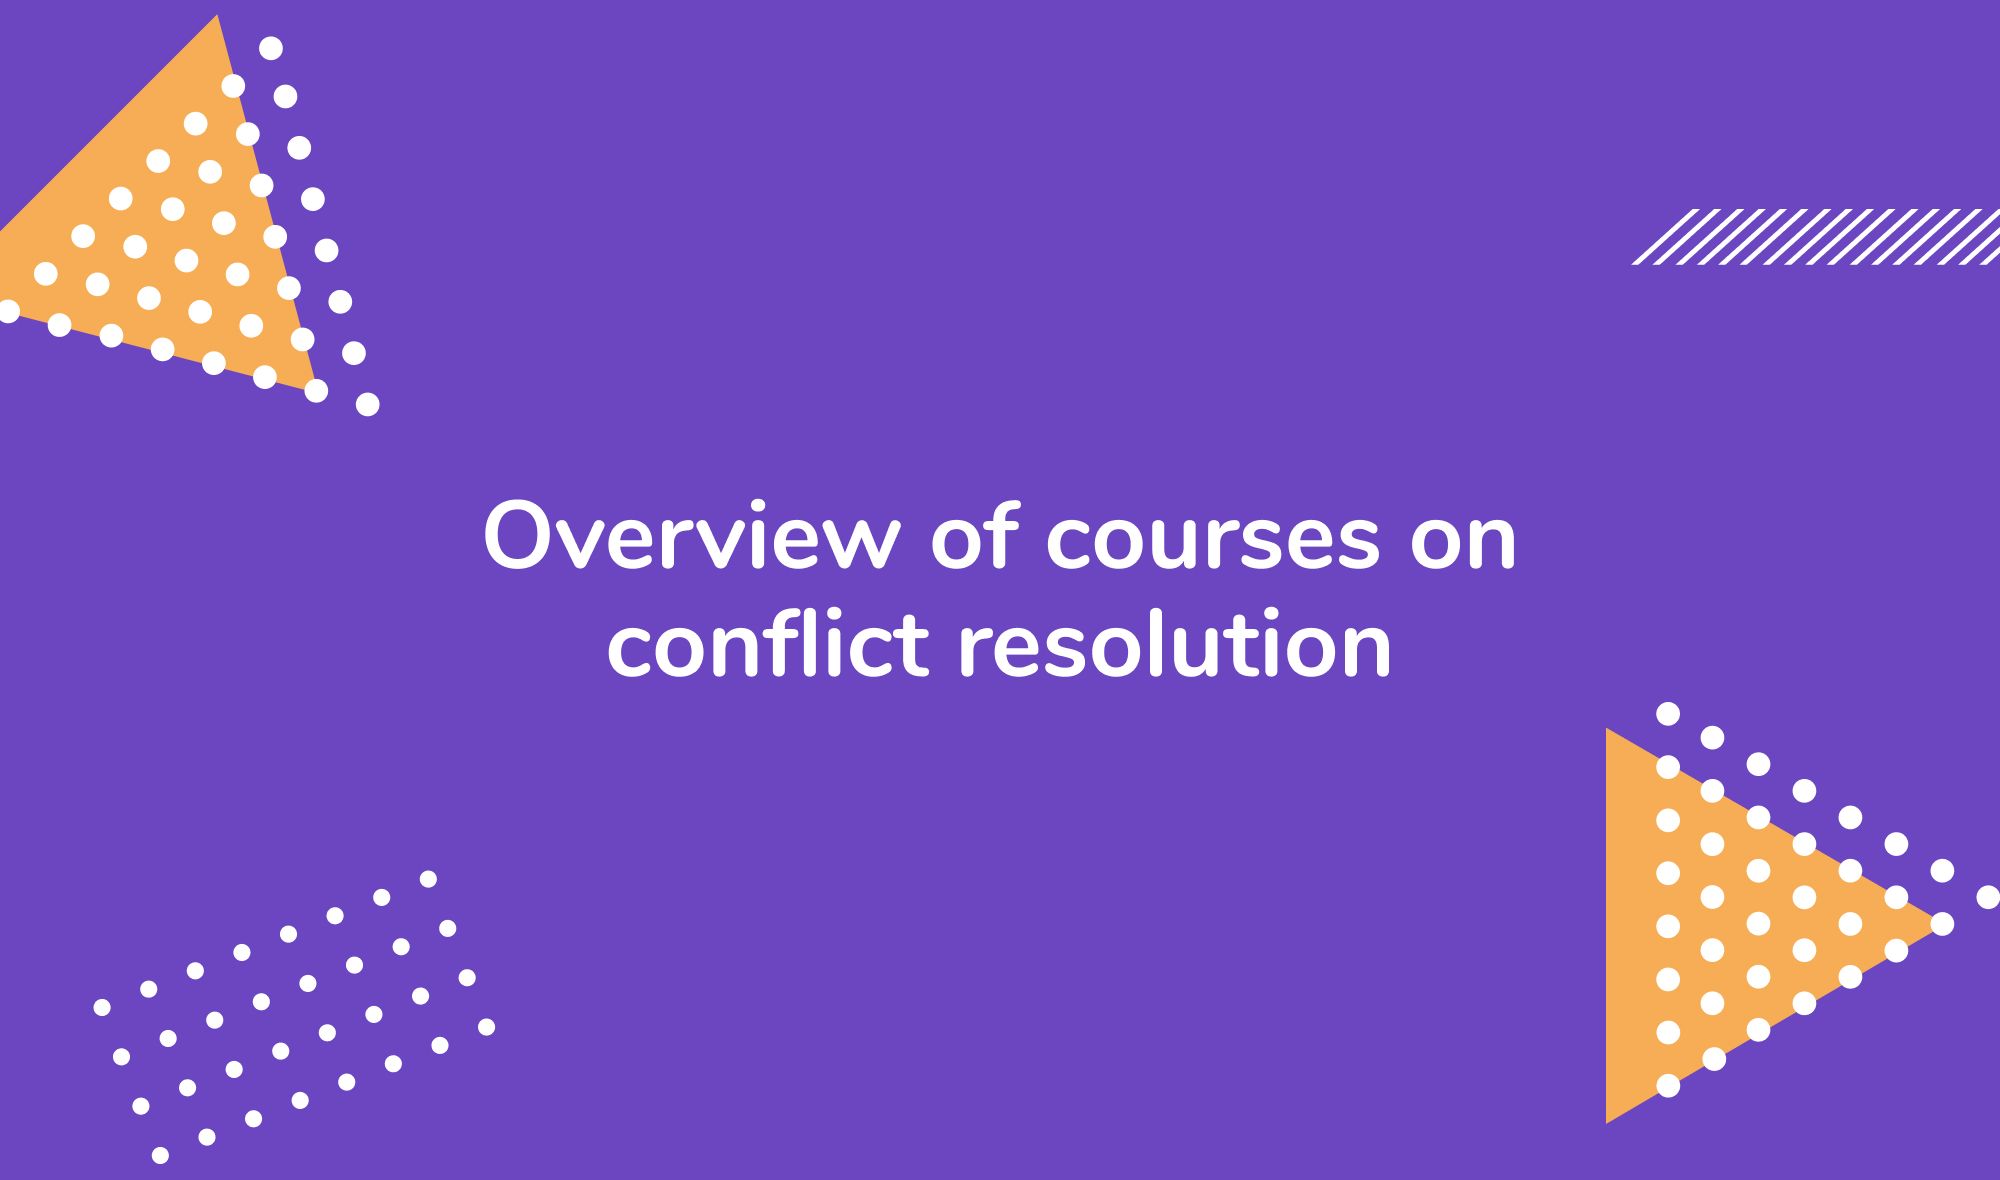 Overview of courses on conflict resolution